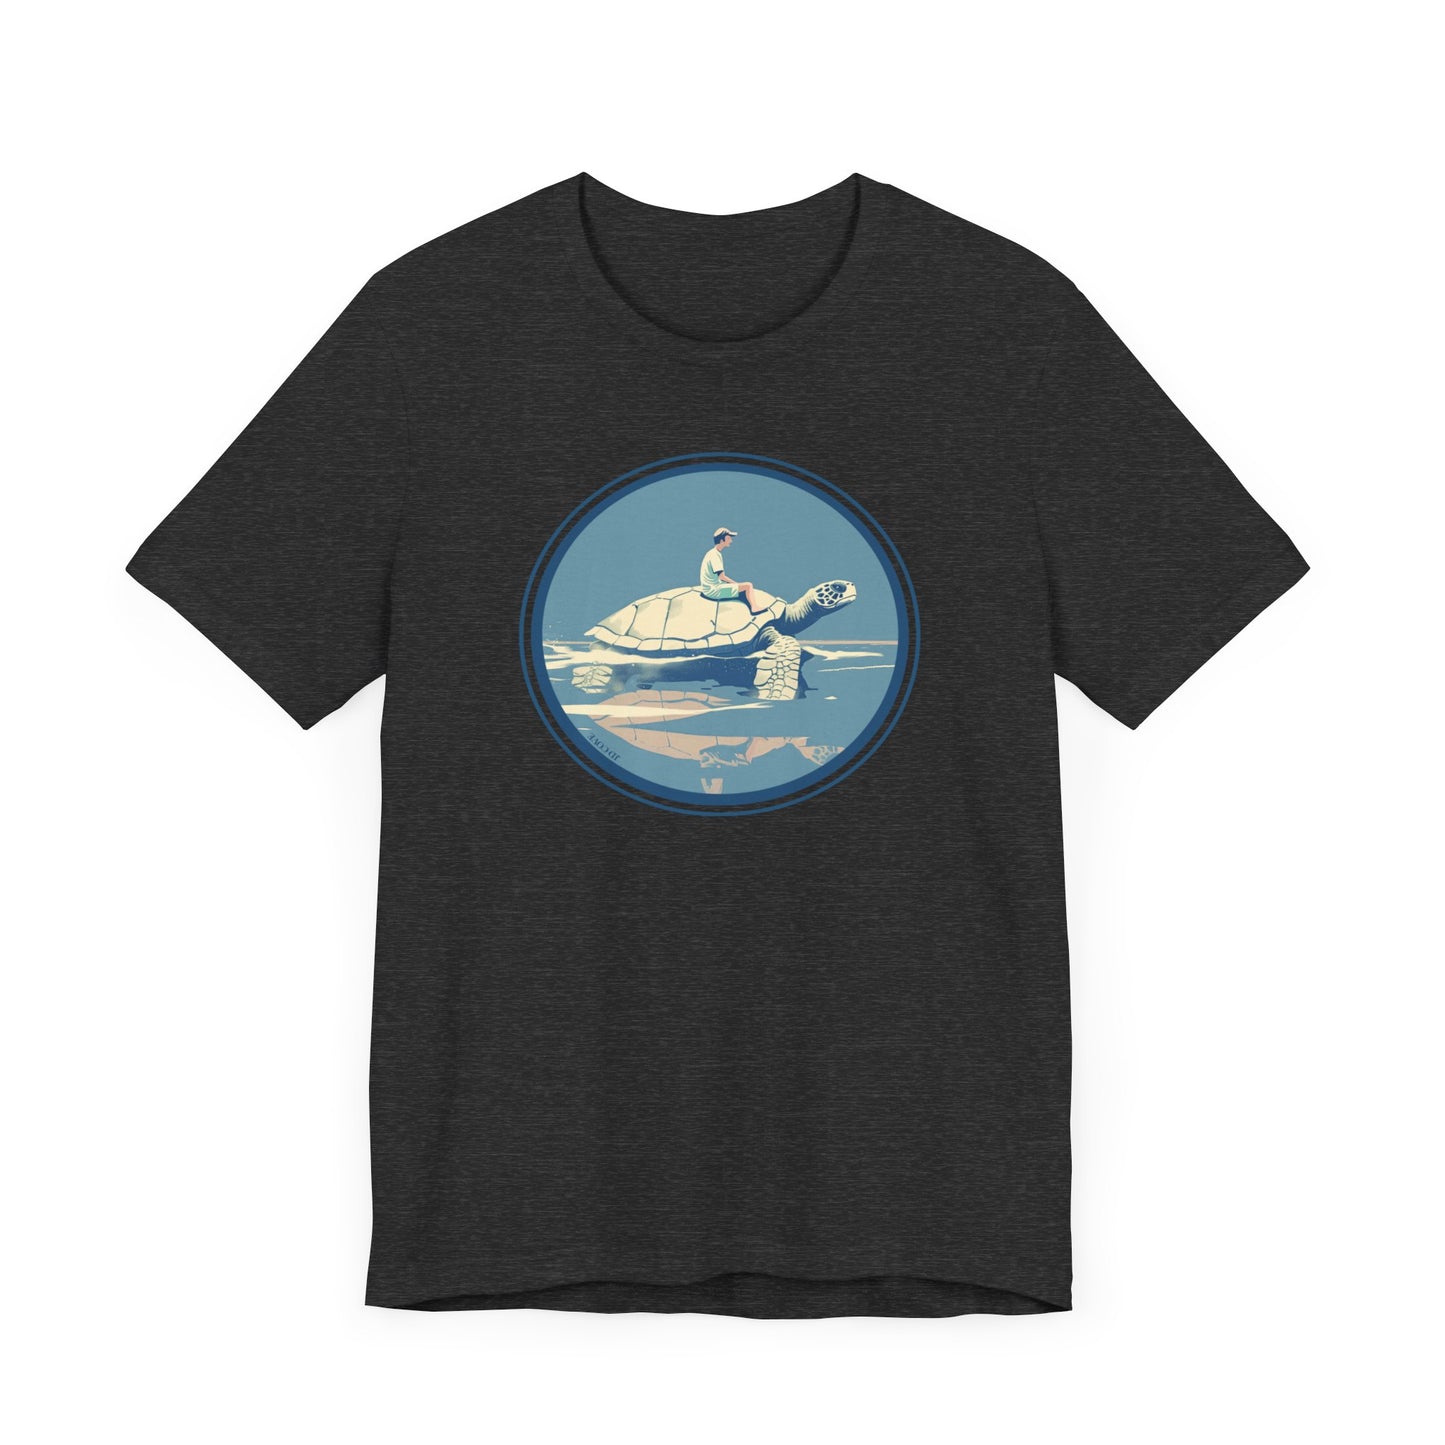 Traveler Sea Turtles Graphic Tee - Unisex Eco-Friendly Cotton Shirt by JD Cove